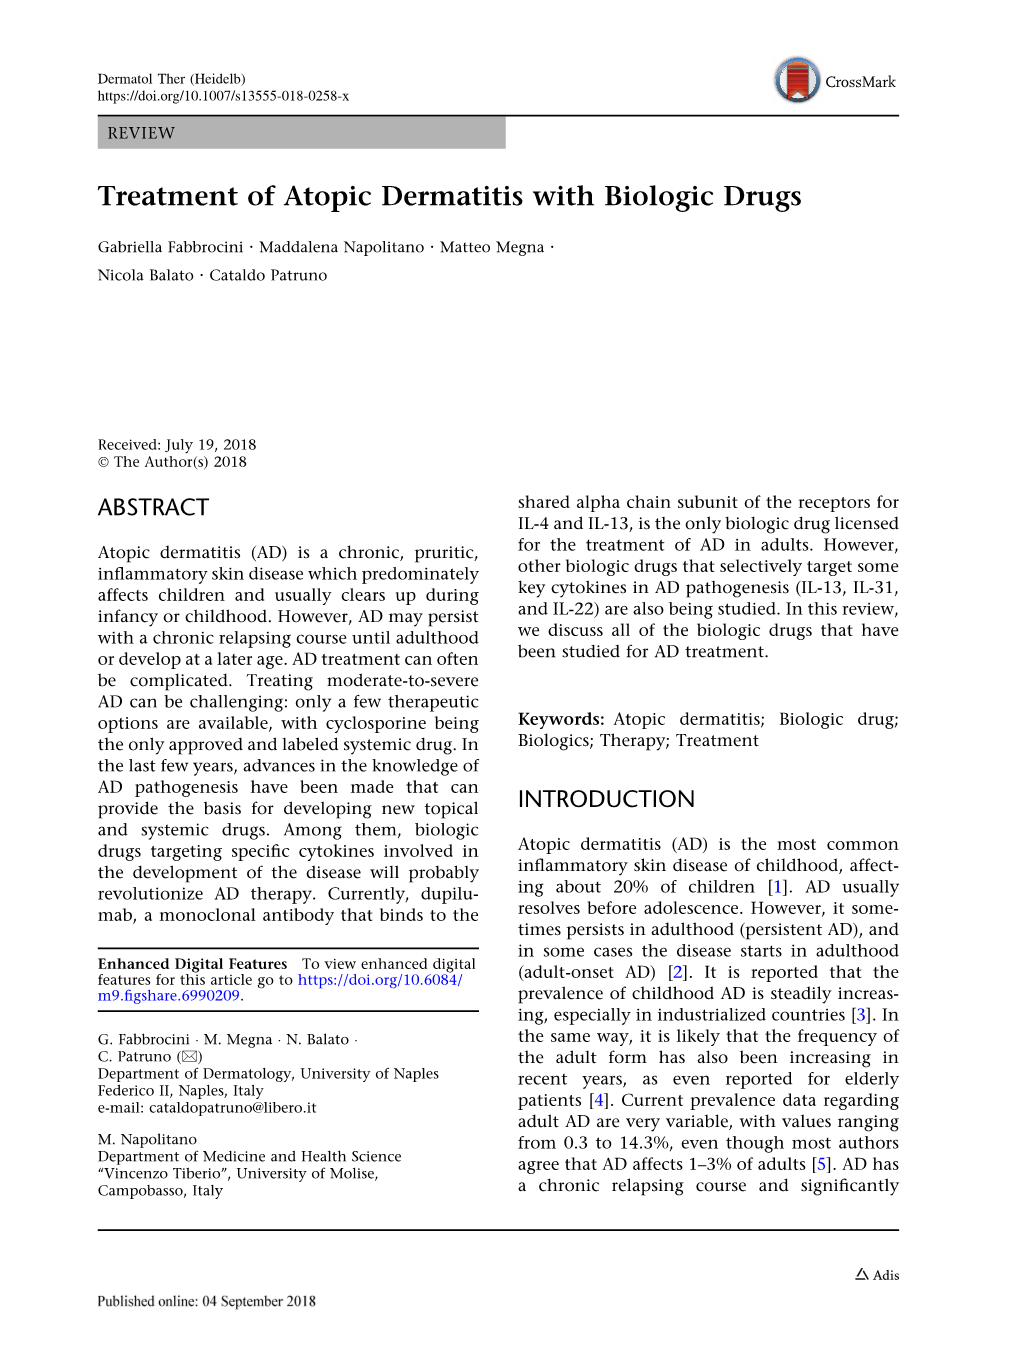 Treatment of Atopic Dermatitis with Biologic Drugs